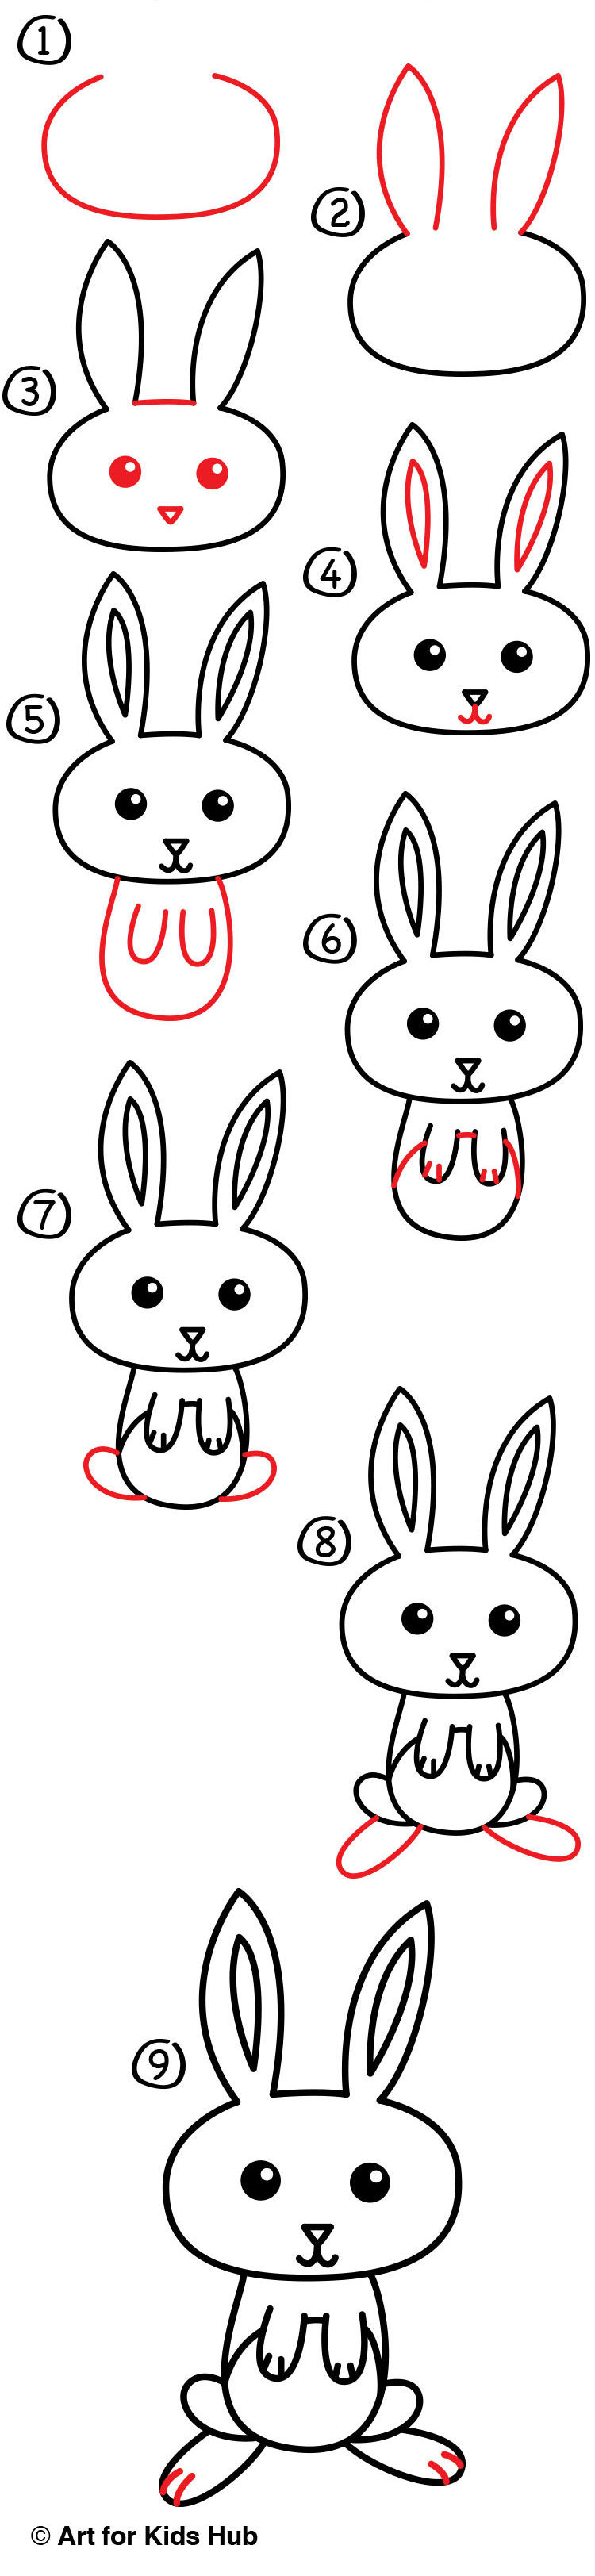 How To Draw Funny Bunny. Easy Drawing, Step By Step, Perfect For Kids 68C